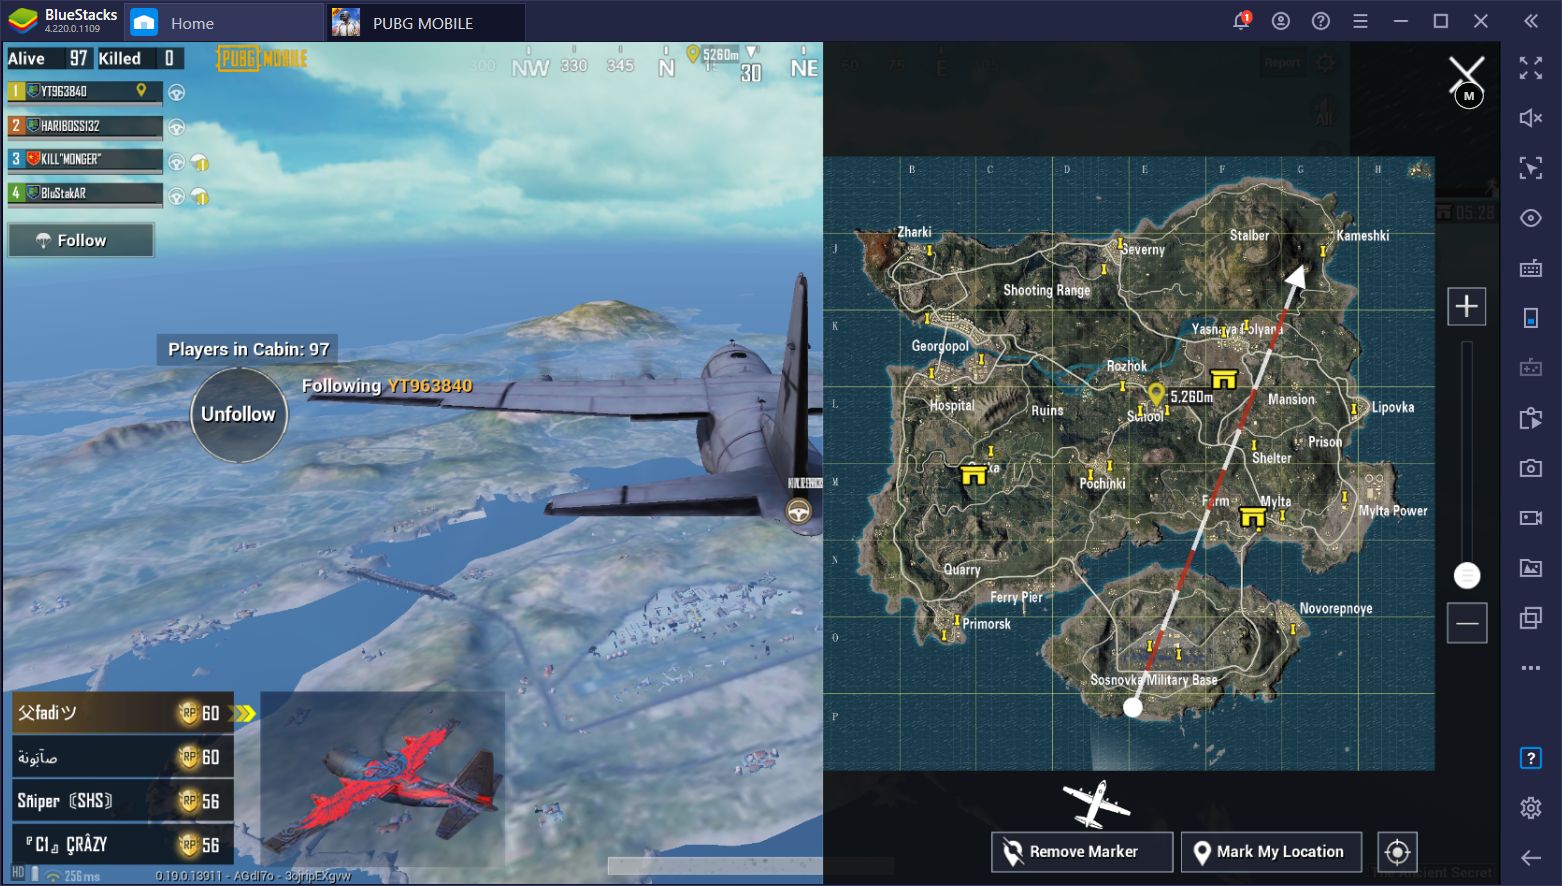 PUBG Mobile Update Brings the New Ancient Secret Game Mode to Miramar and Erangel